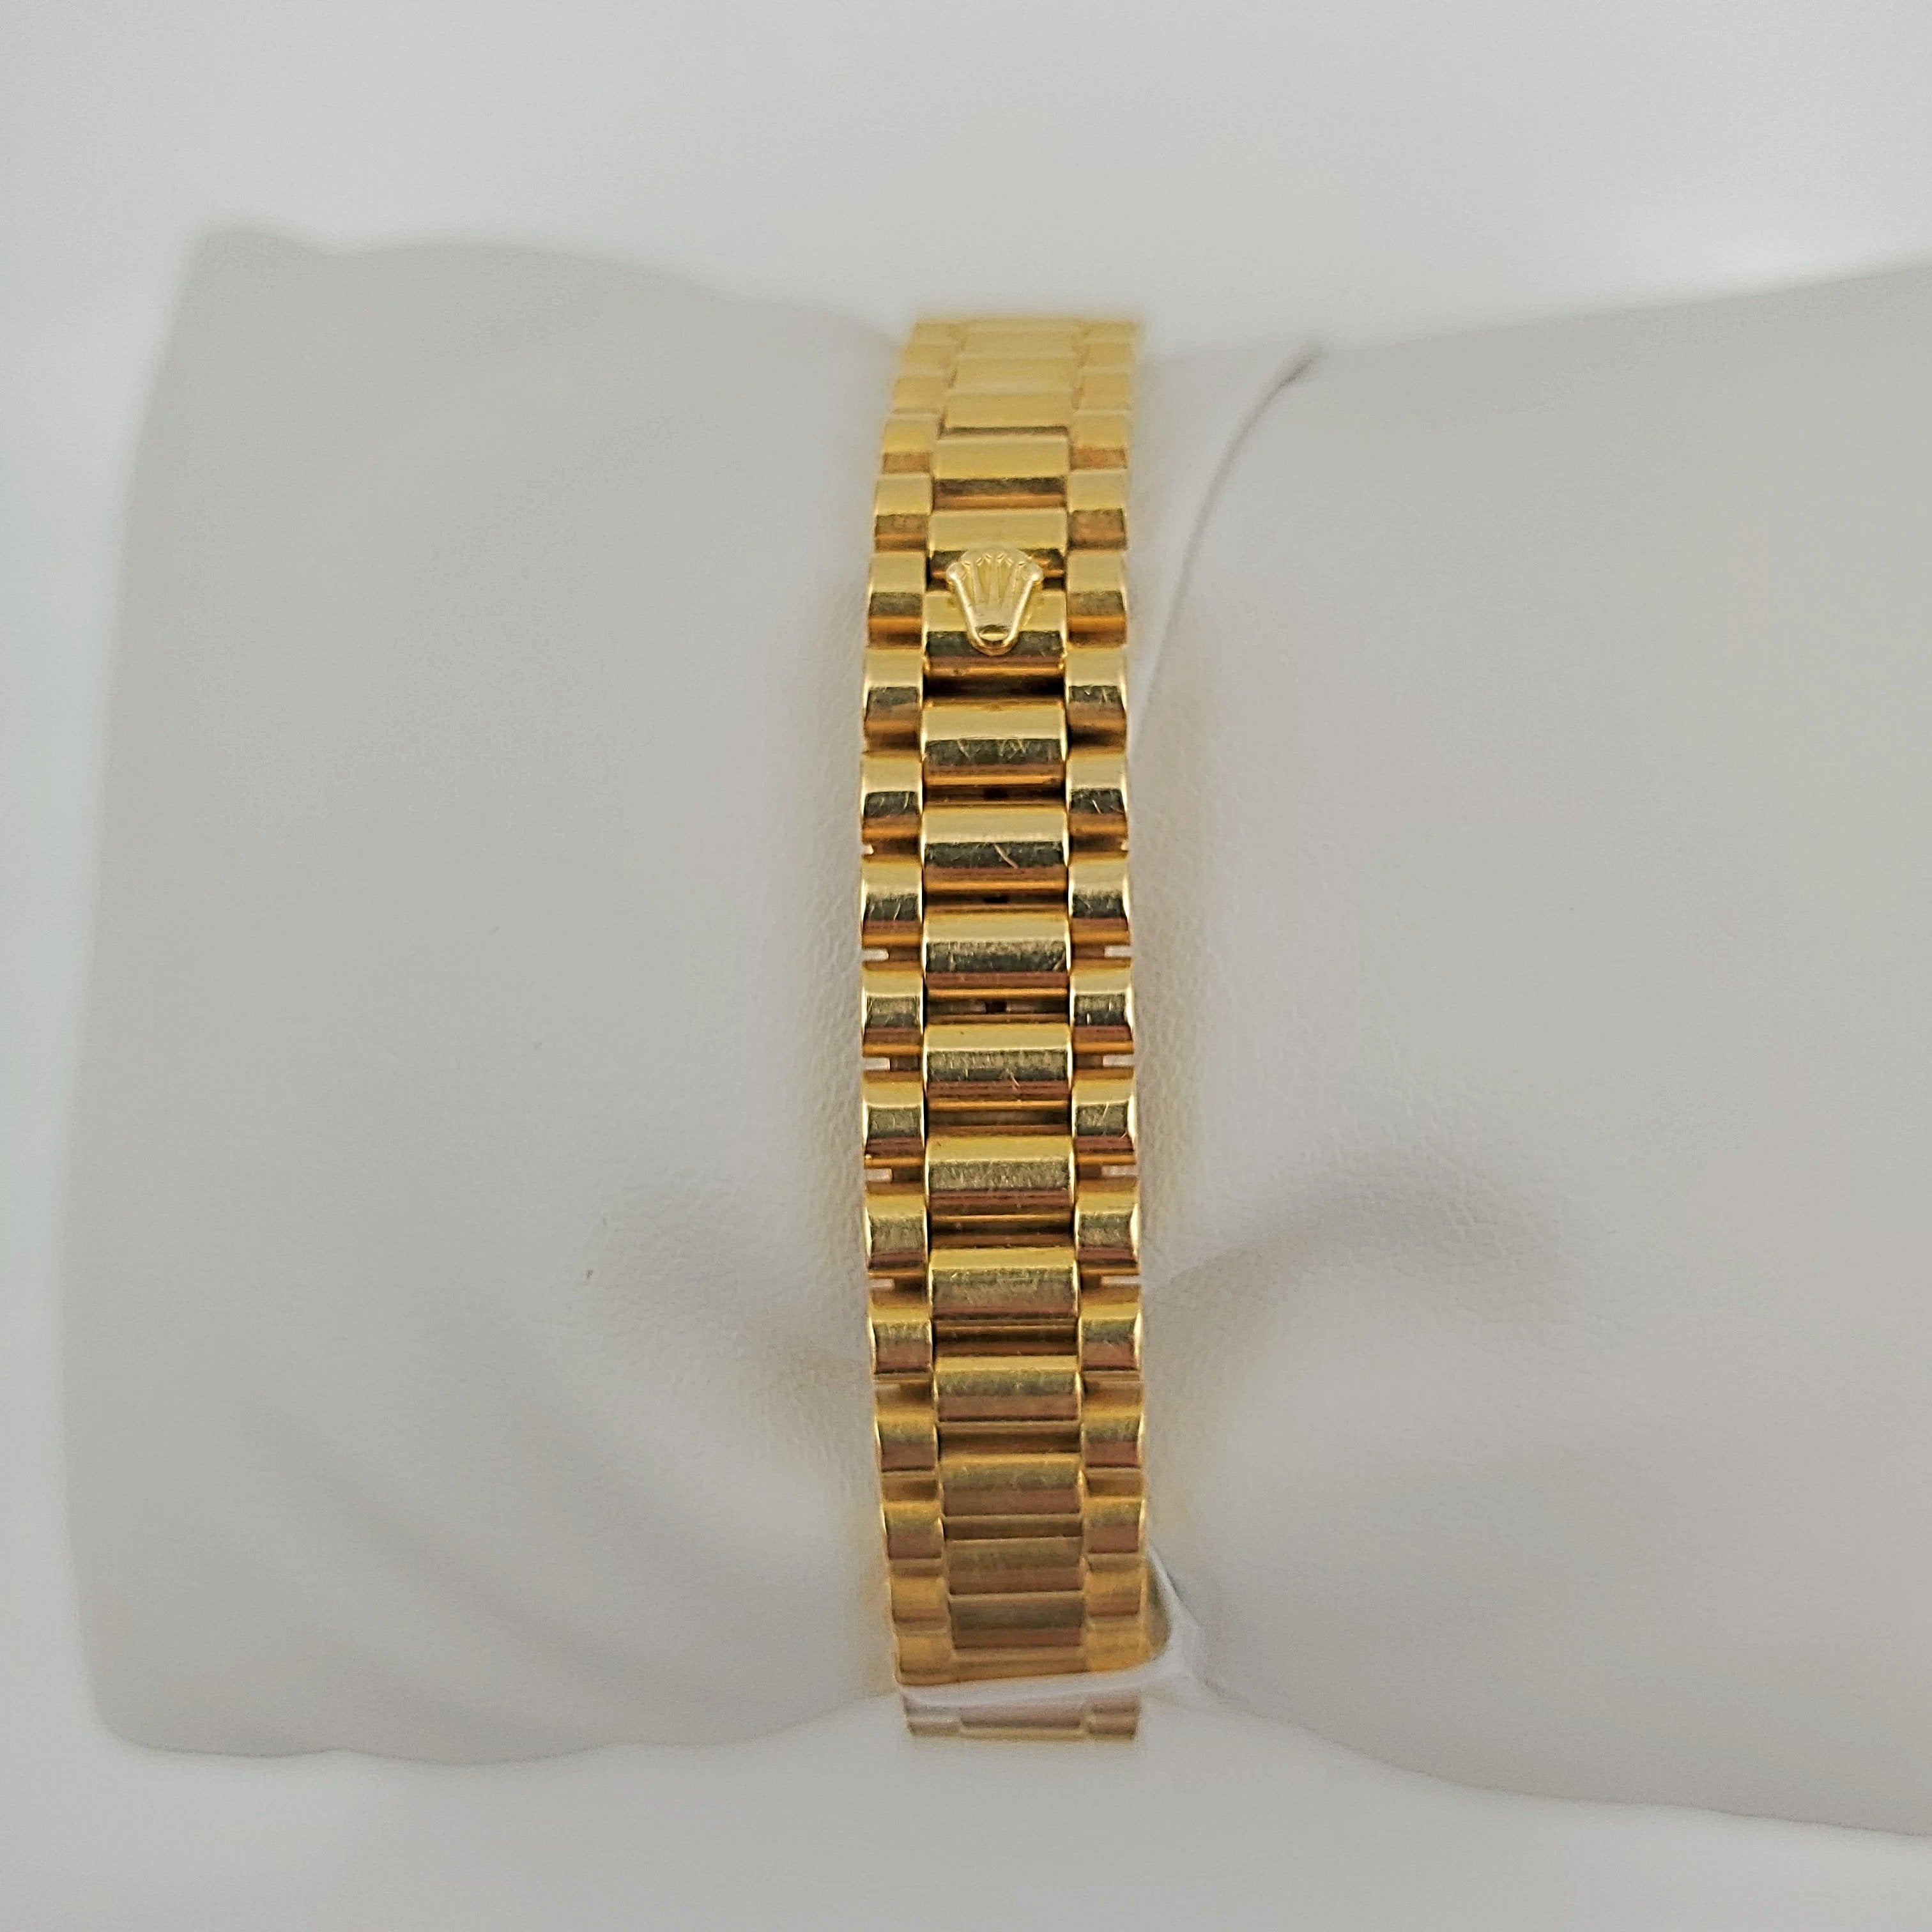 Ladies Rolex 26mm Presidential 18K Yellow Gold Watch with Mother of Pearl Diamond Dial and Diamond Bezel. (Pre-Owned)